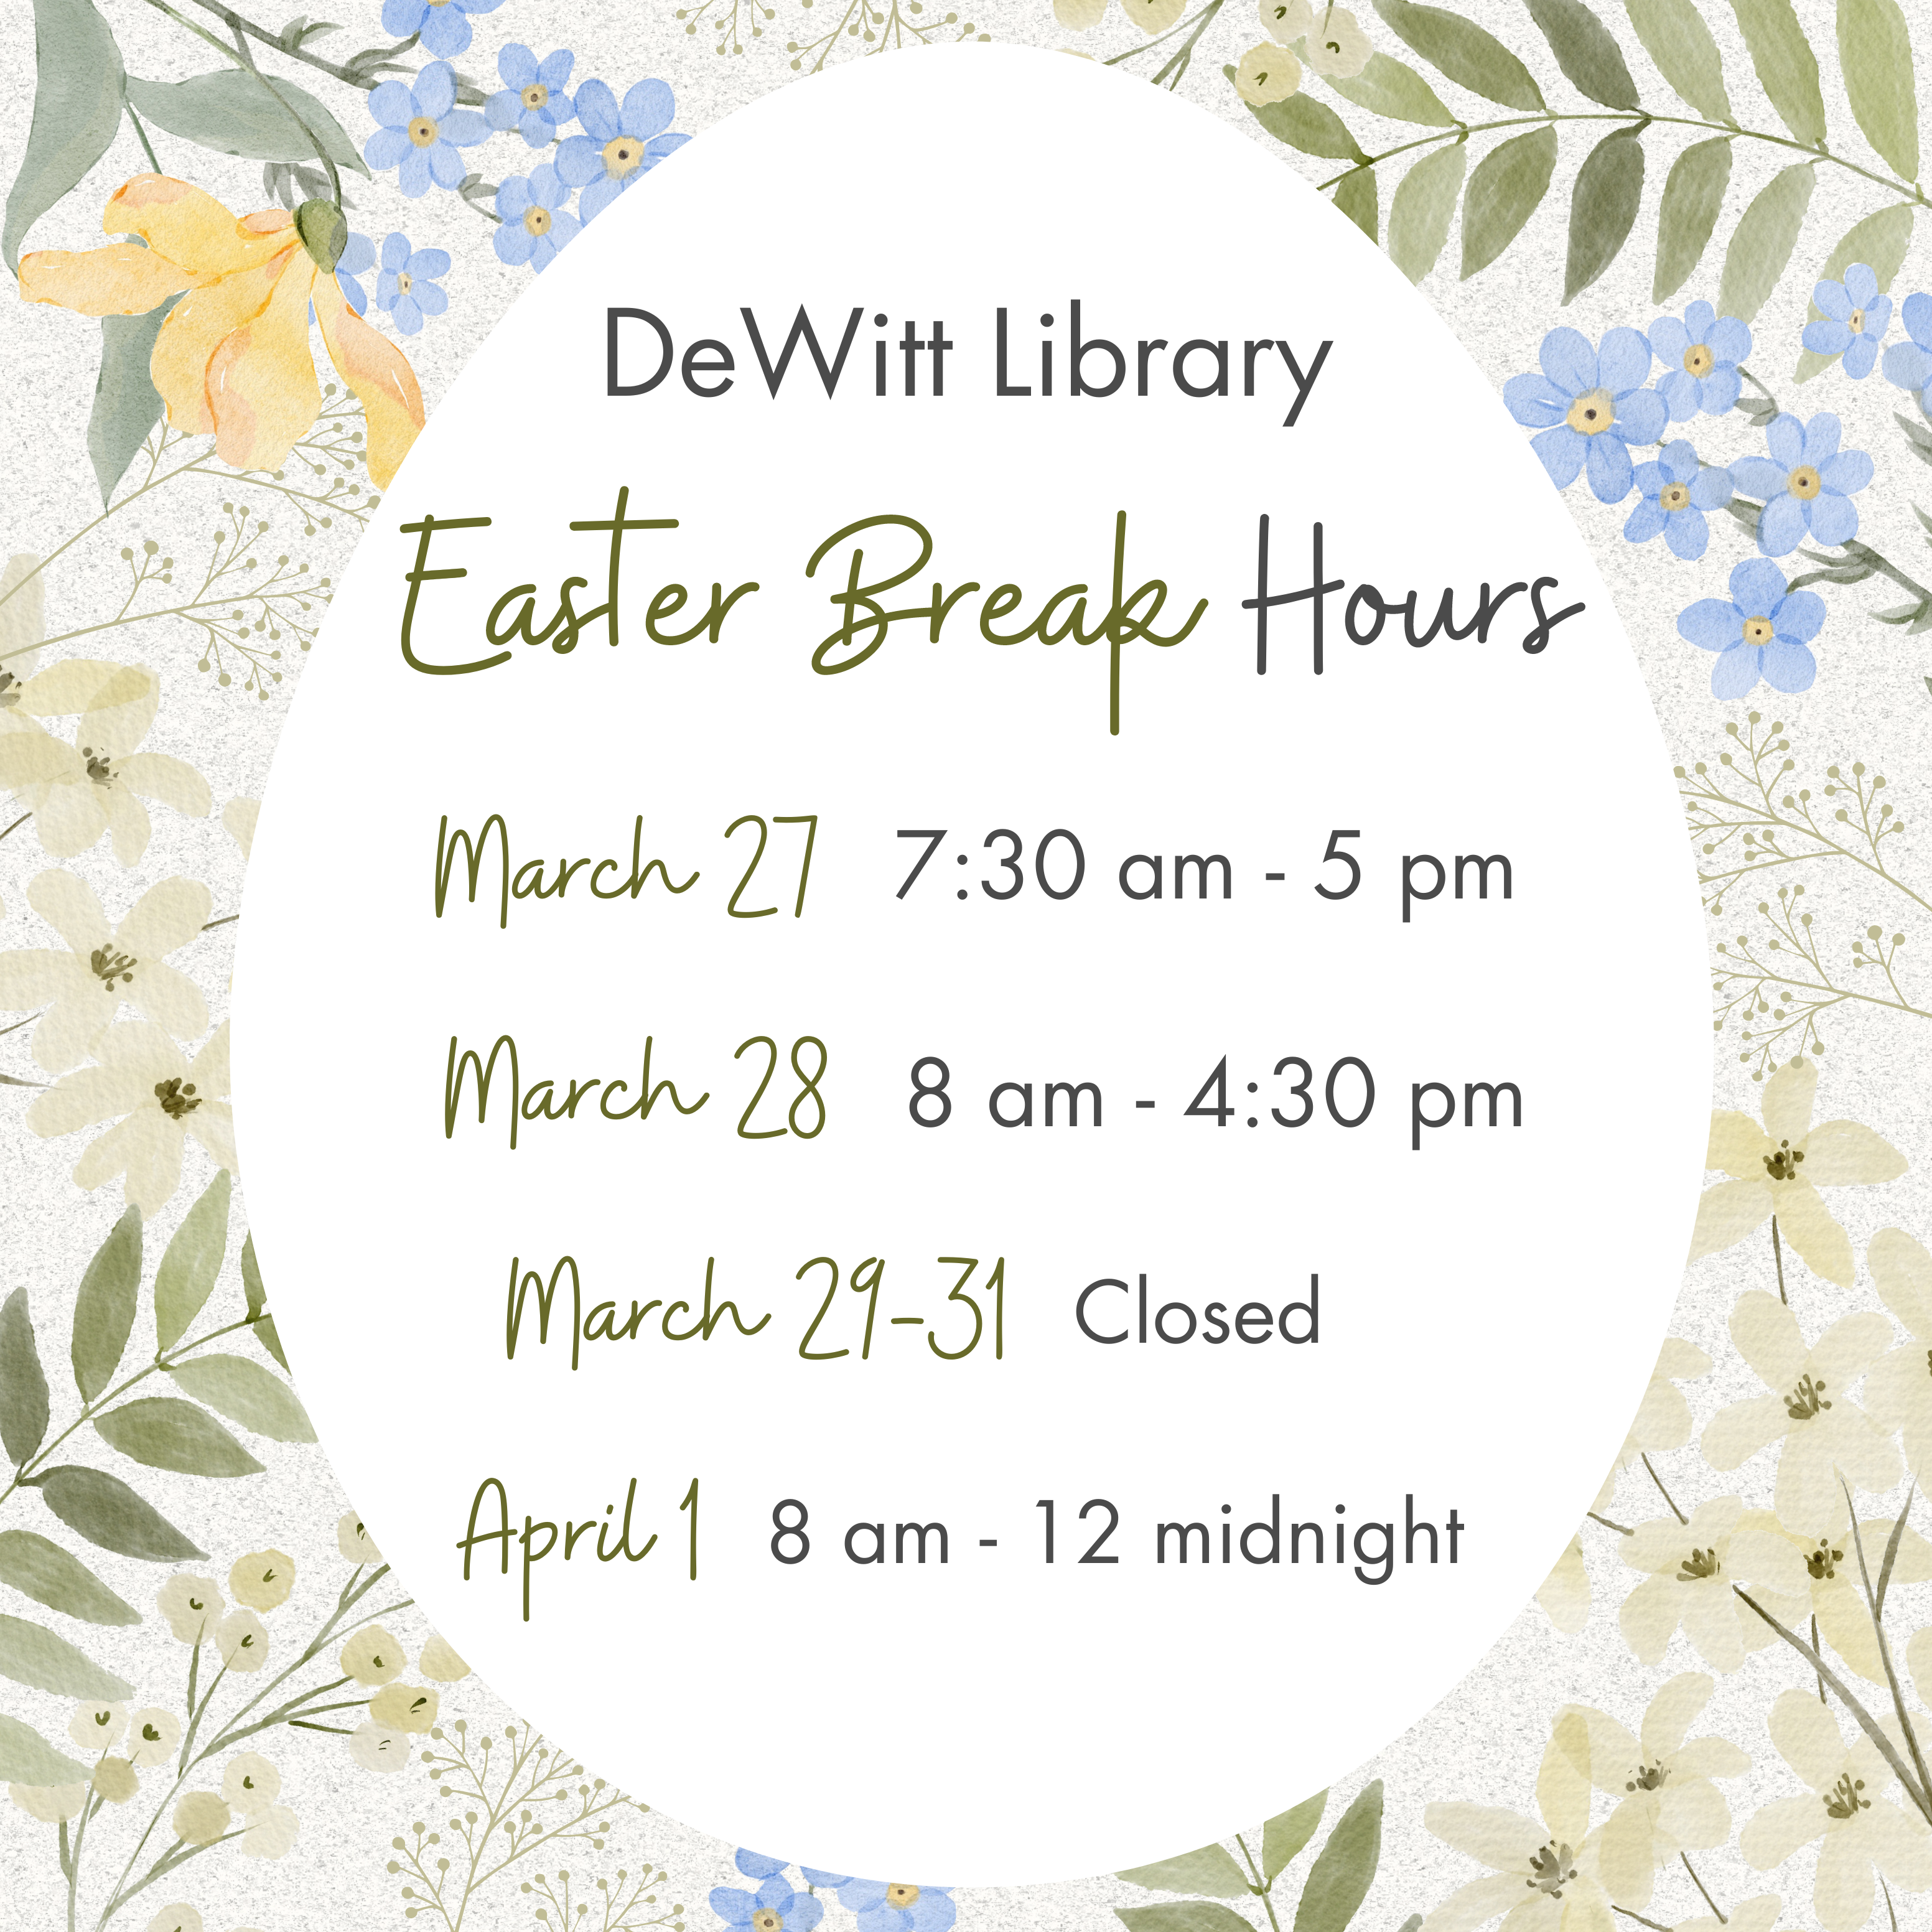 DeWitt Library Easter Break Hours: March 27: 7:30 am - 5 pm; March 28: 8 am - 4:30 pm; March 29-31: Closed; April 1: 8 am - 12 midnight